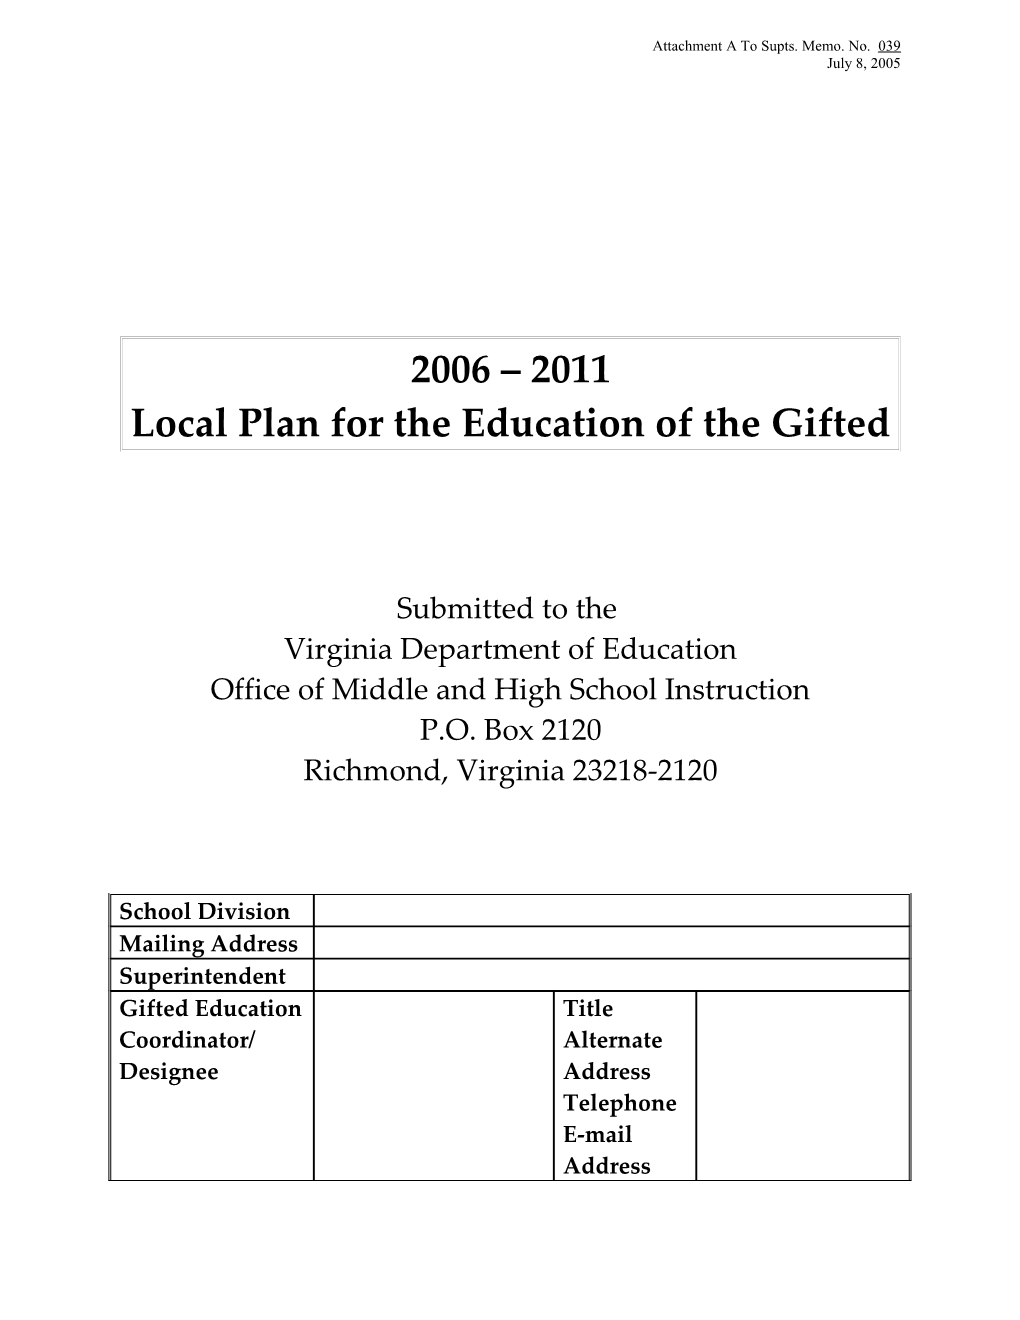 Local Plan for the Education of the Gifted s1